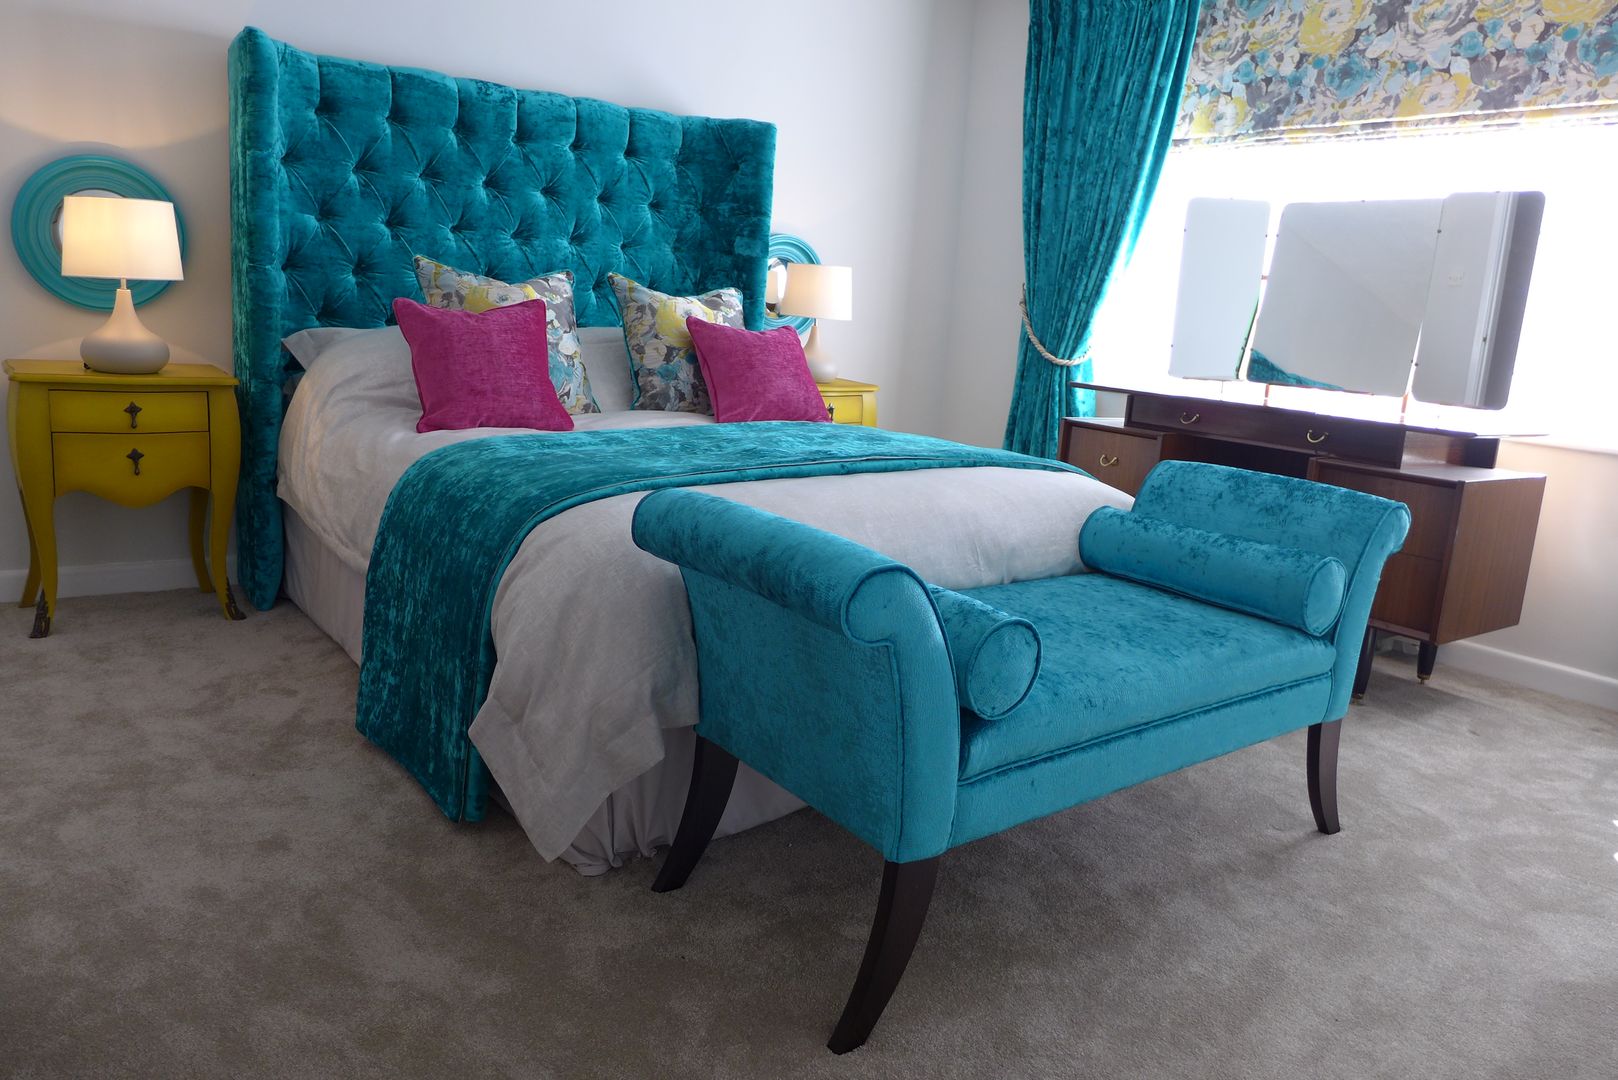 hotel style bedroom Style Within Camera da letto in stile classico bed end chaise,blue velvet,dress curtains,roman blind,pink accents,velvet headboard,fabric headboard,boutique bedroom,hotel style bedroom